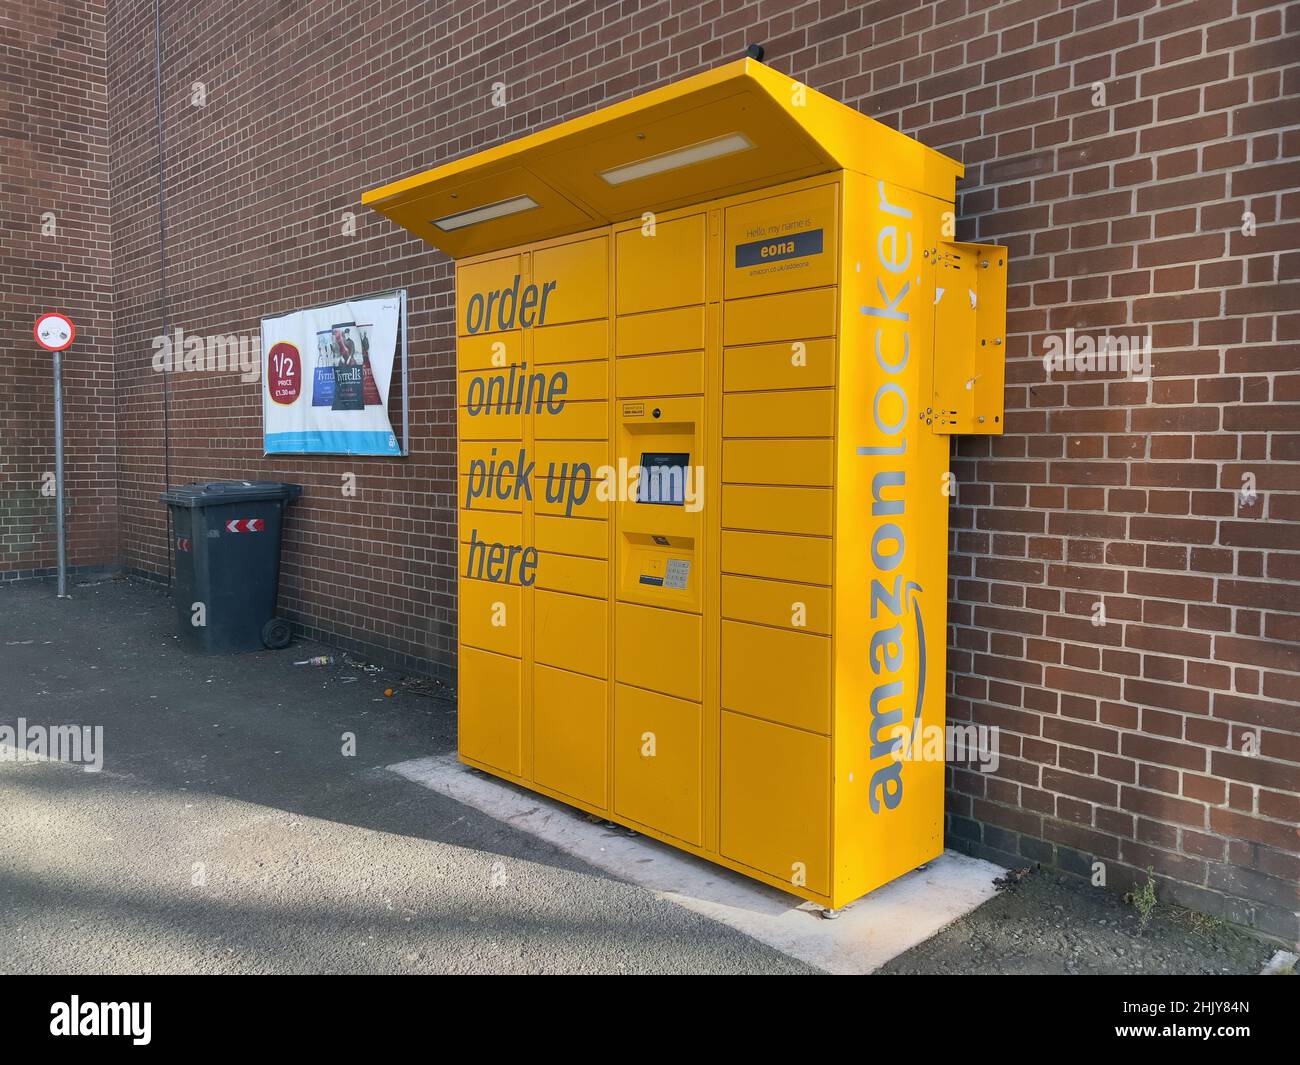 Derby UK - January 29th 2022 - Amazon lockers in an alleyway. Amazon Locker is a self-service package delivery service of parcel lockers. Stock Photo